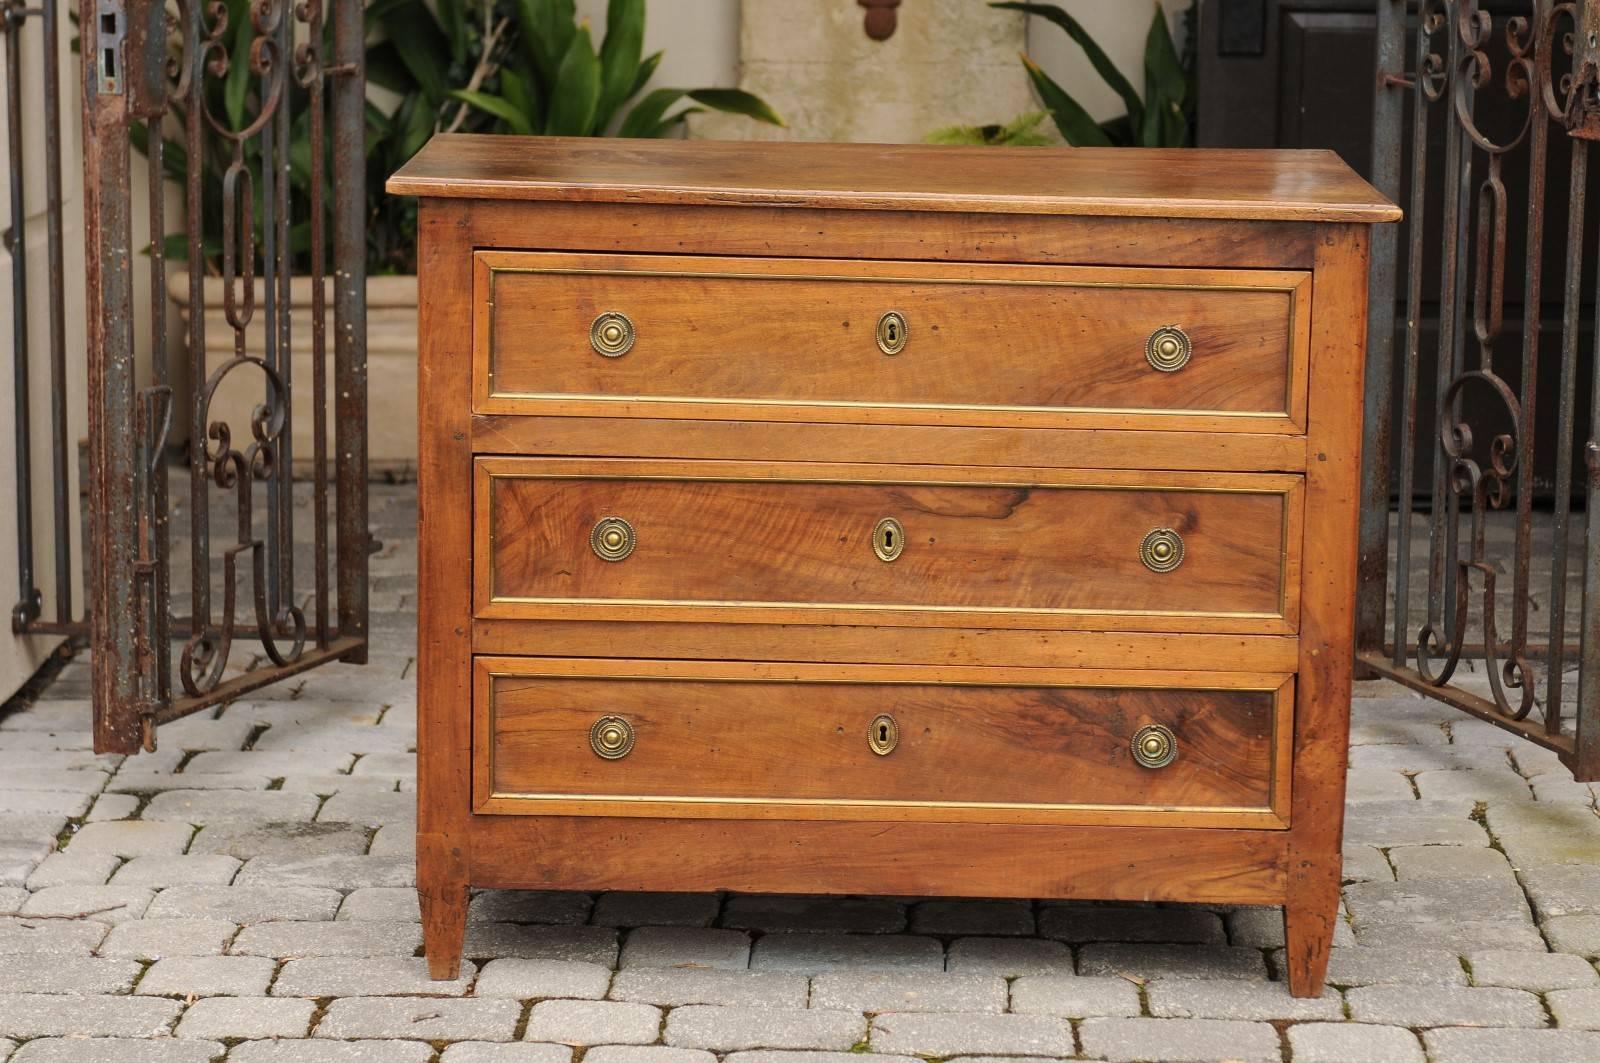 A neoclassical French walnut veneered three-drawer commode with brass trim and tapered feet from the early 19th century. Born in the early years of the tumultuous 19th century, this French commode features an exquisite slightly raised rectangular